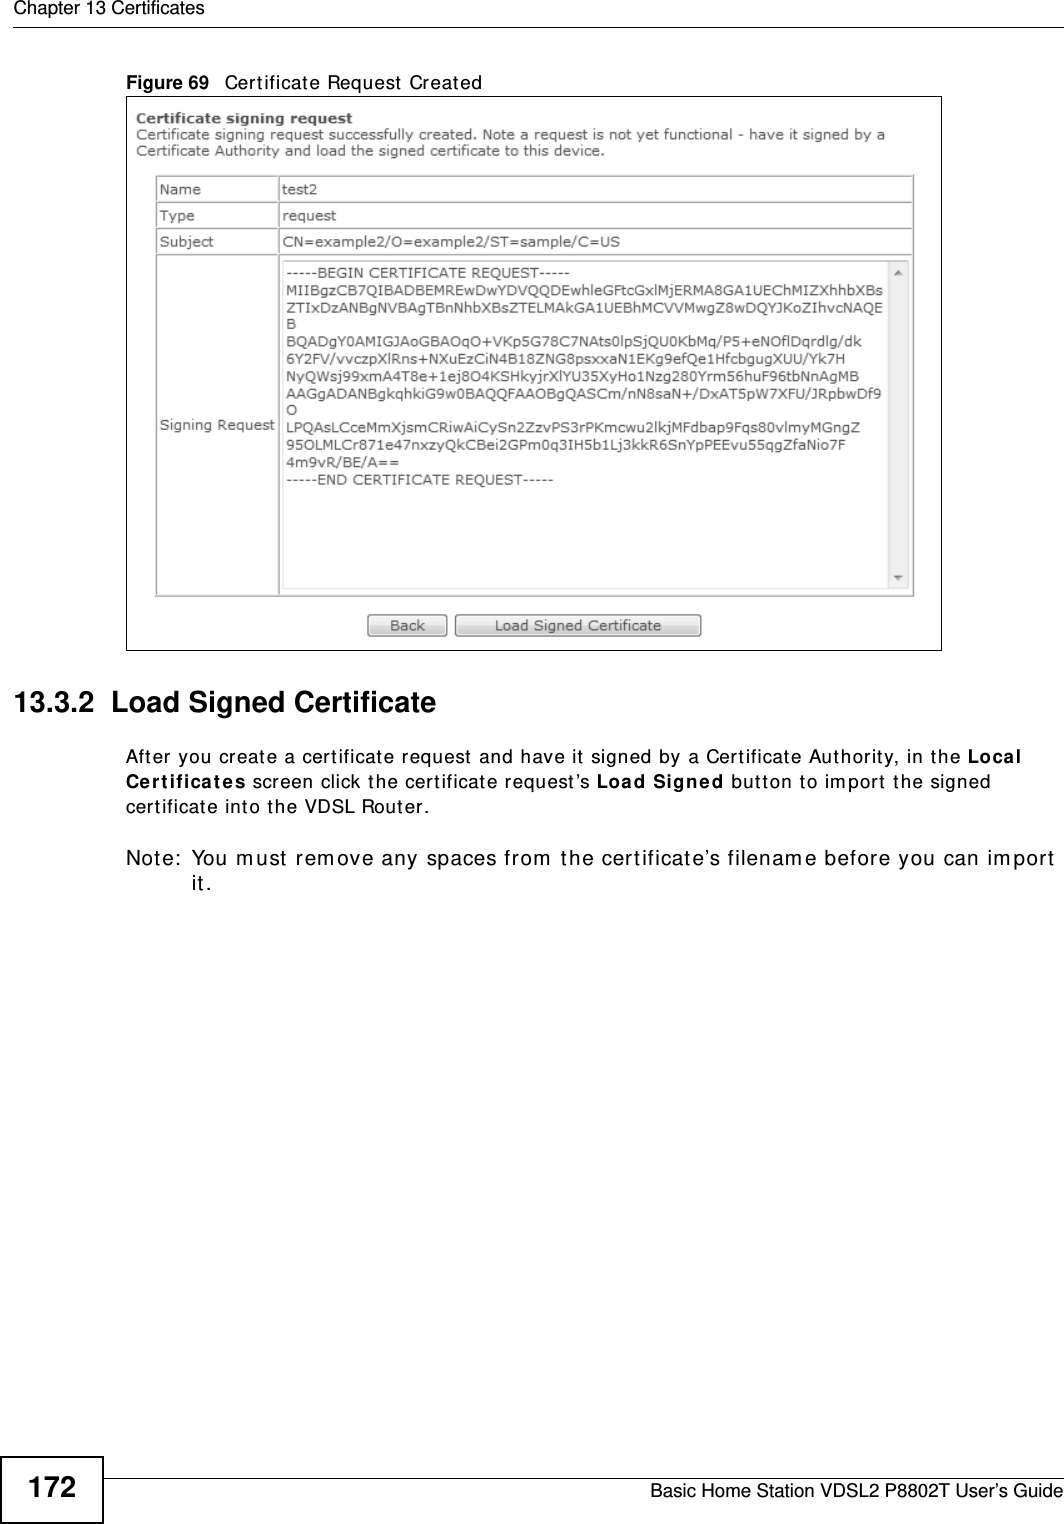 Chapter 13 CertificatesBasic Home Station VDSL2 P8802T User’s Guide172Figure 69   Cert ificate Request  Created13.3.2  Load Signed Certificate Aft er you create a cert ificat e request  and have it signed by a Cert ificate Authority, in t he Loca l Ce r t if ica t e s screen click t he certificate request ’s Load Sign ed butt on t o im port the signed certificat e into the VDSL Router. Note:  You m ust  rem ove any spaces from  t he cert ificate’s filenam e before you can im port it .